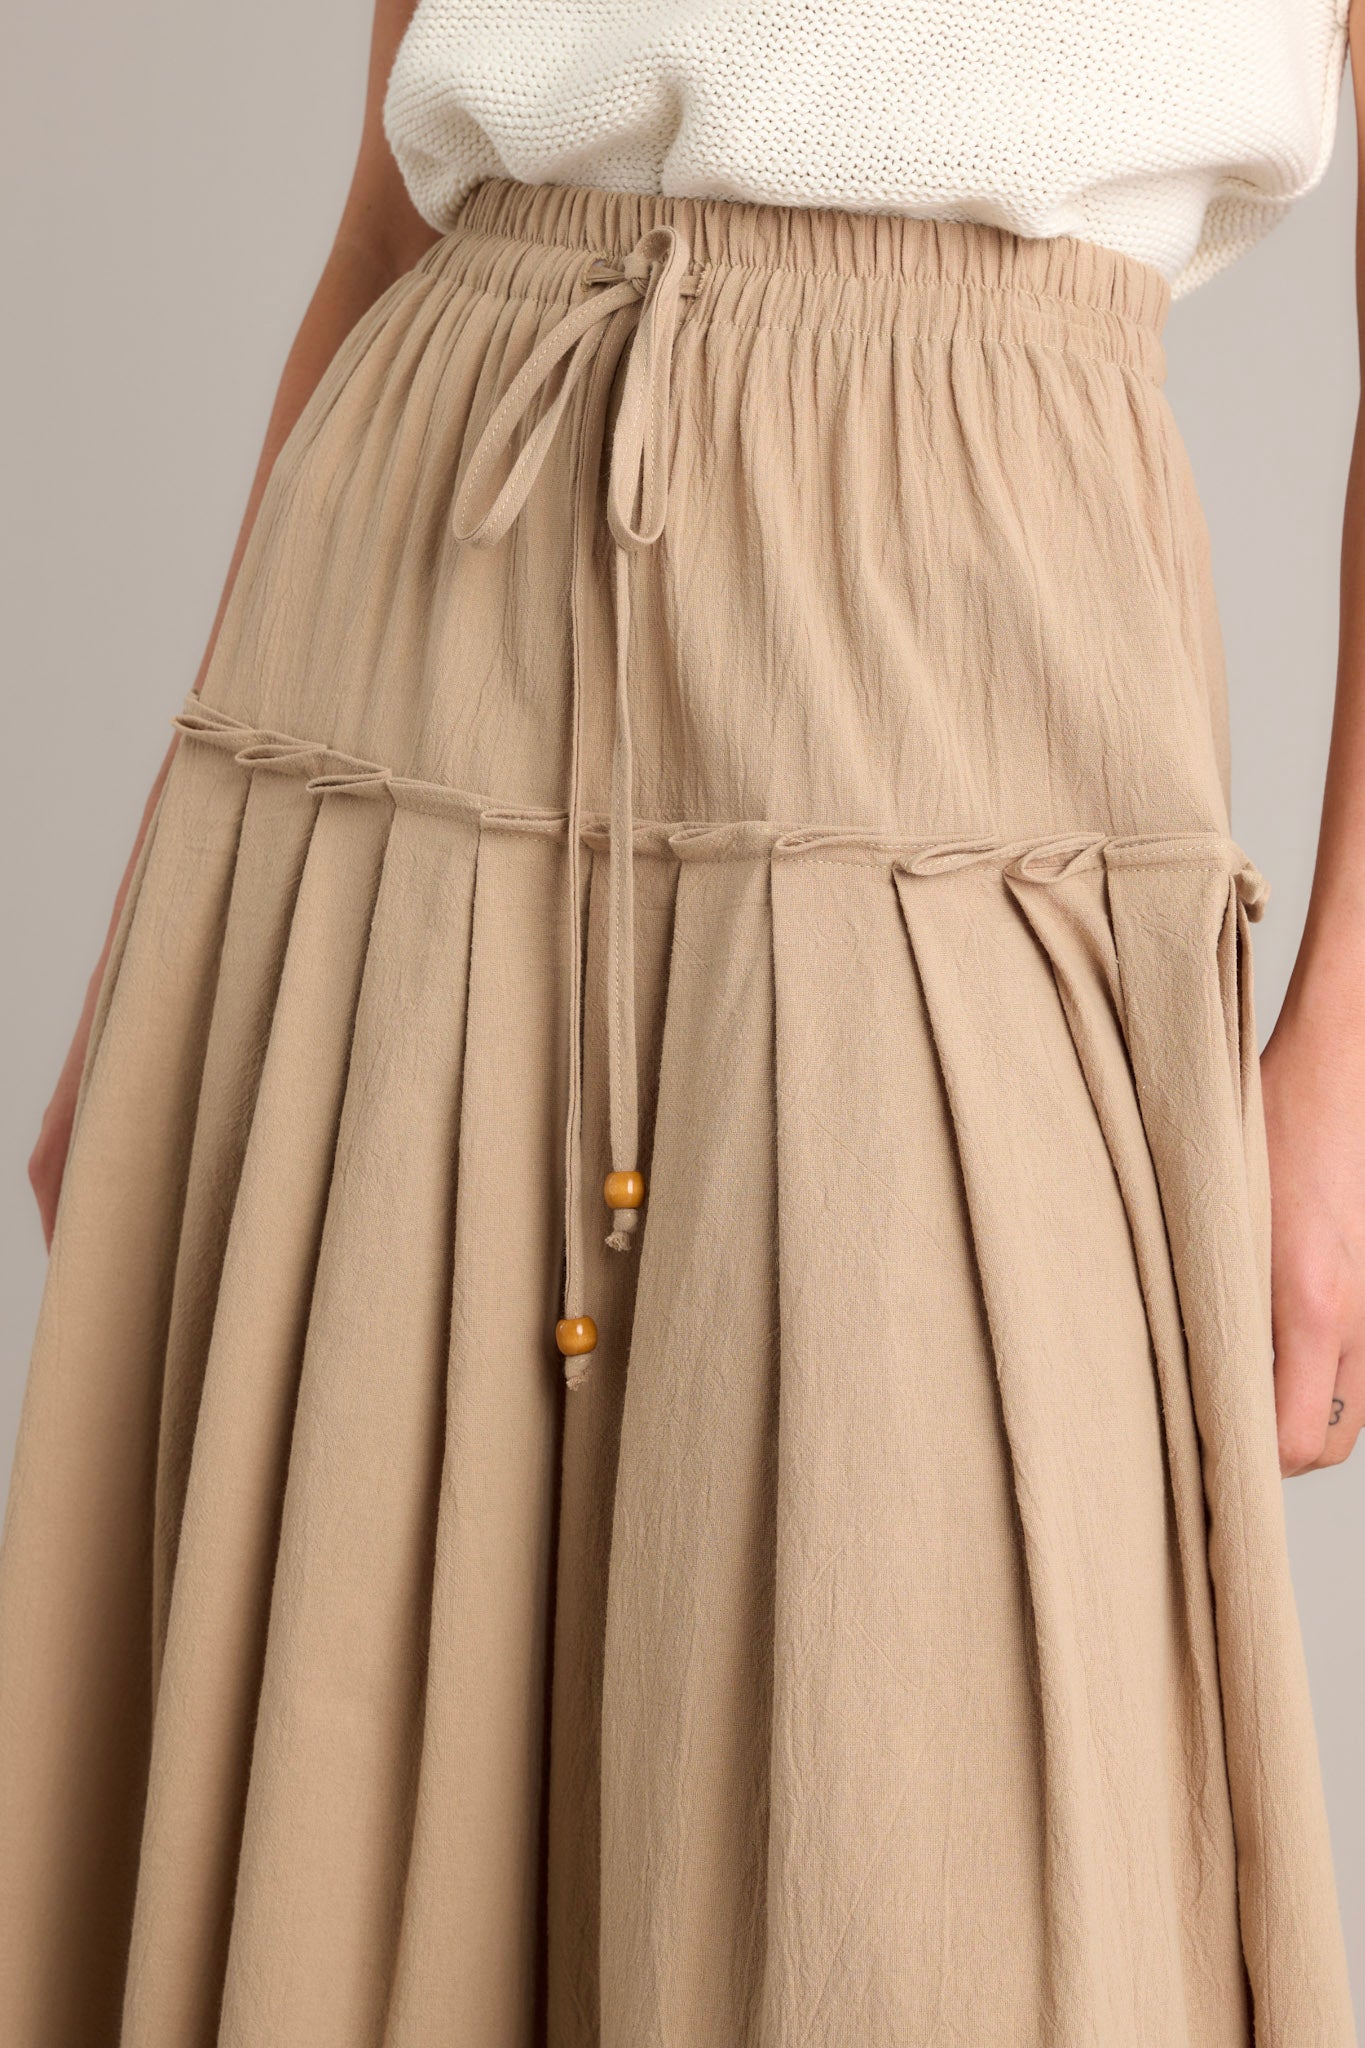 Close-up of the beige maxi skirt showing the self-tie drawstring, elastic waistband, and subtle pleats.